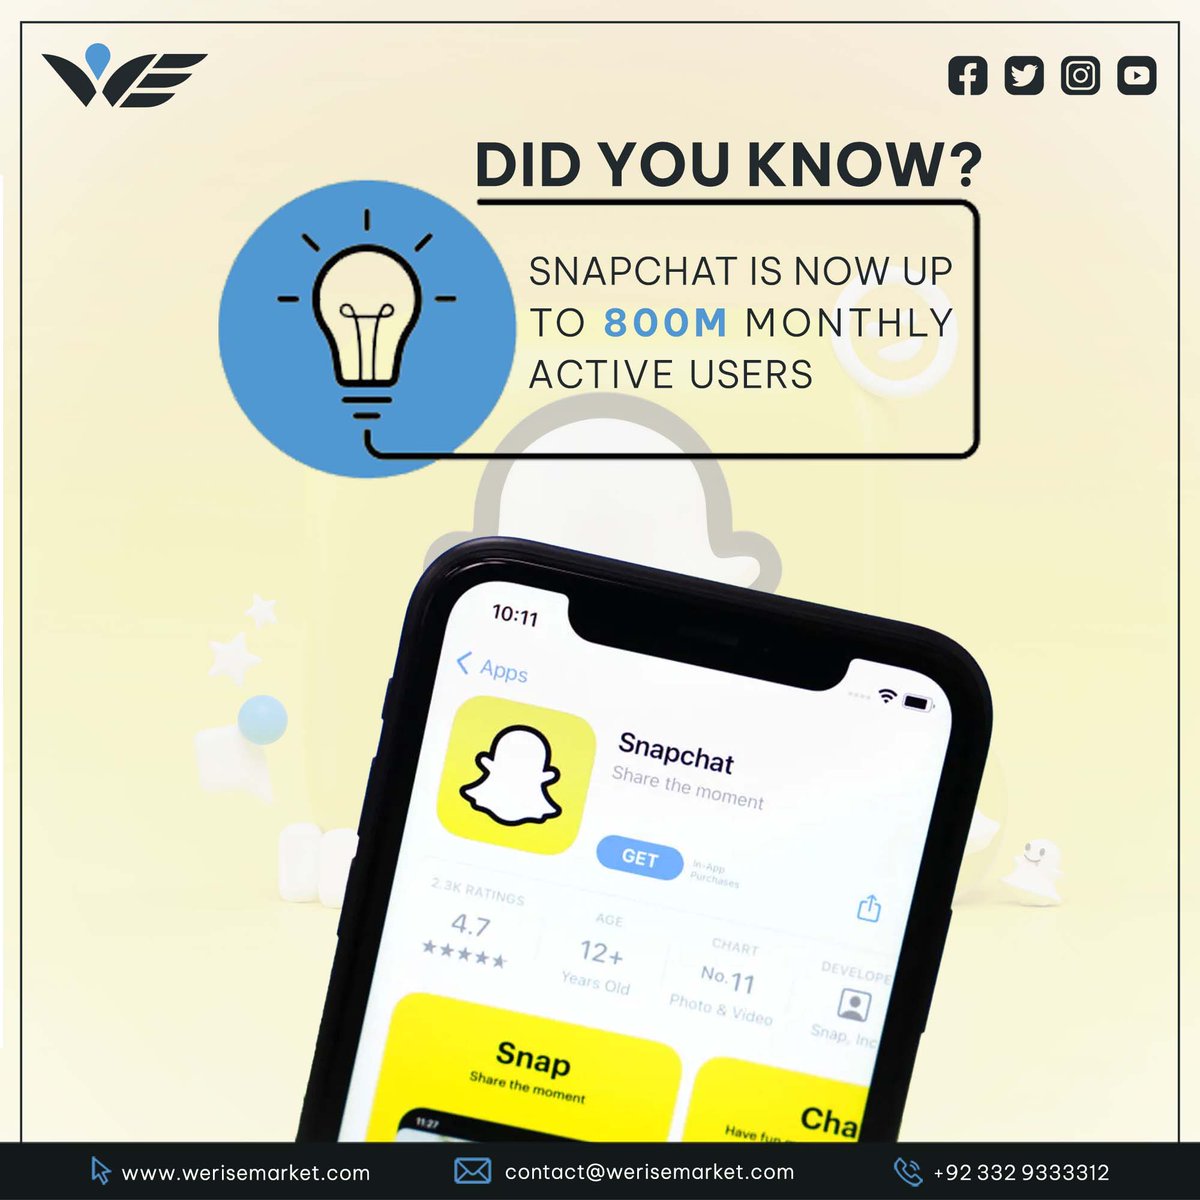 𝐒𝐨𝐜𝐢𝐚𝐥 𝐌𝐞𝐝𝐢𝐚 𝐍𝐞𝐰𝐬 𝐔𝐩𝐝𝐚𝐭𝐞: more than 𝟖𝟎𝟎𝐌 monthly active users of Snapchat means it is also a noteworthy platform to market your business. Is your business on Snapchat??? No...Contact us 0332 933 3312 #digitalmarketing #socialmediatoday #snapchatupdate